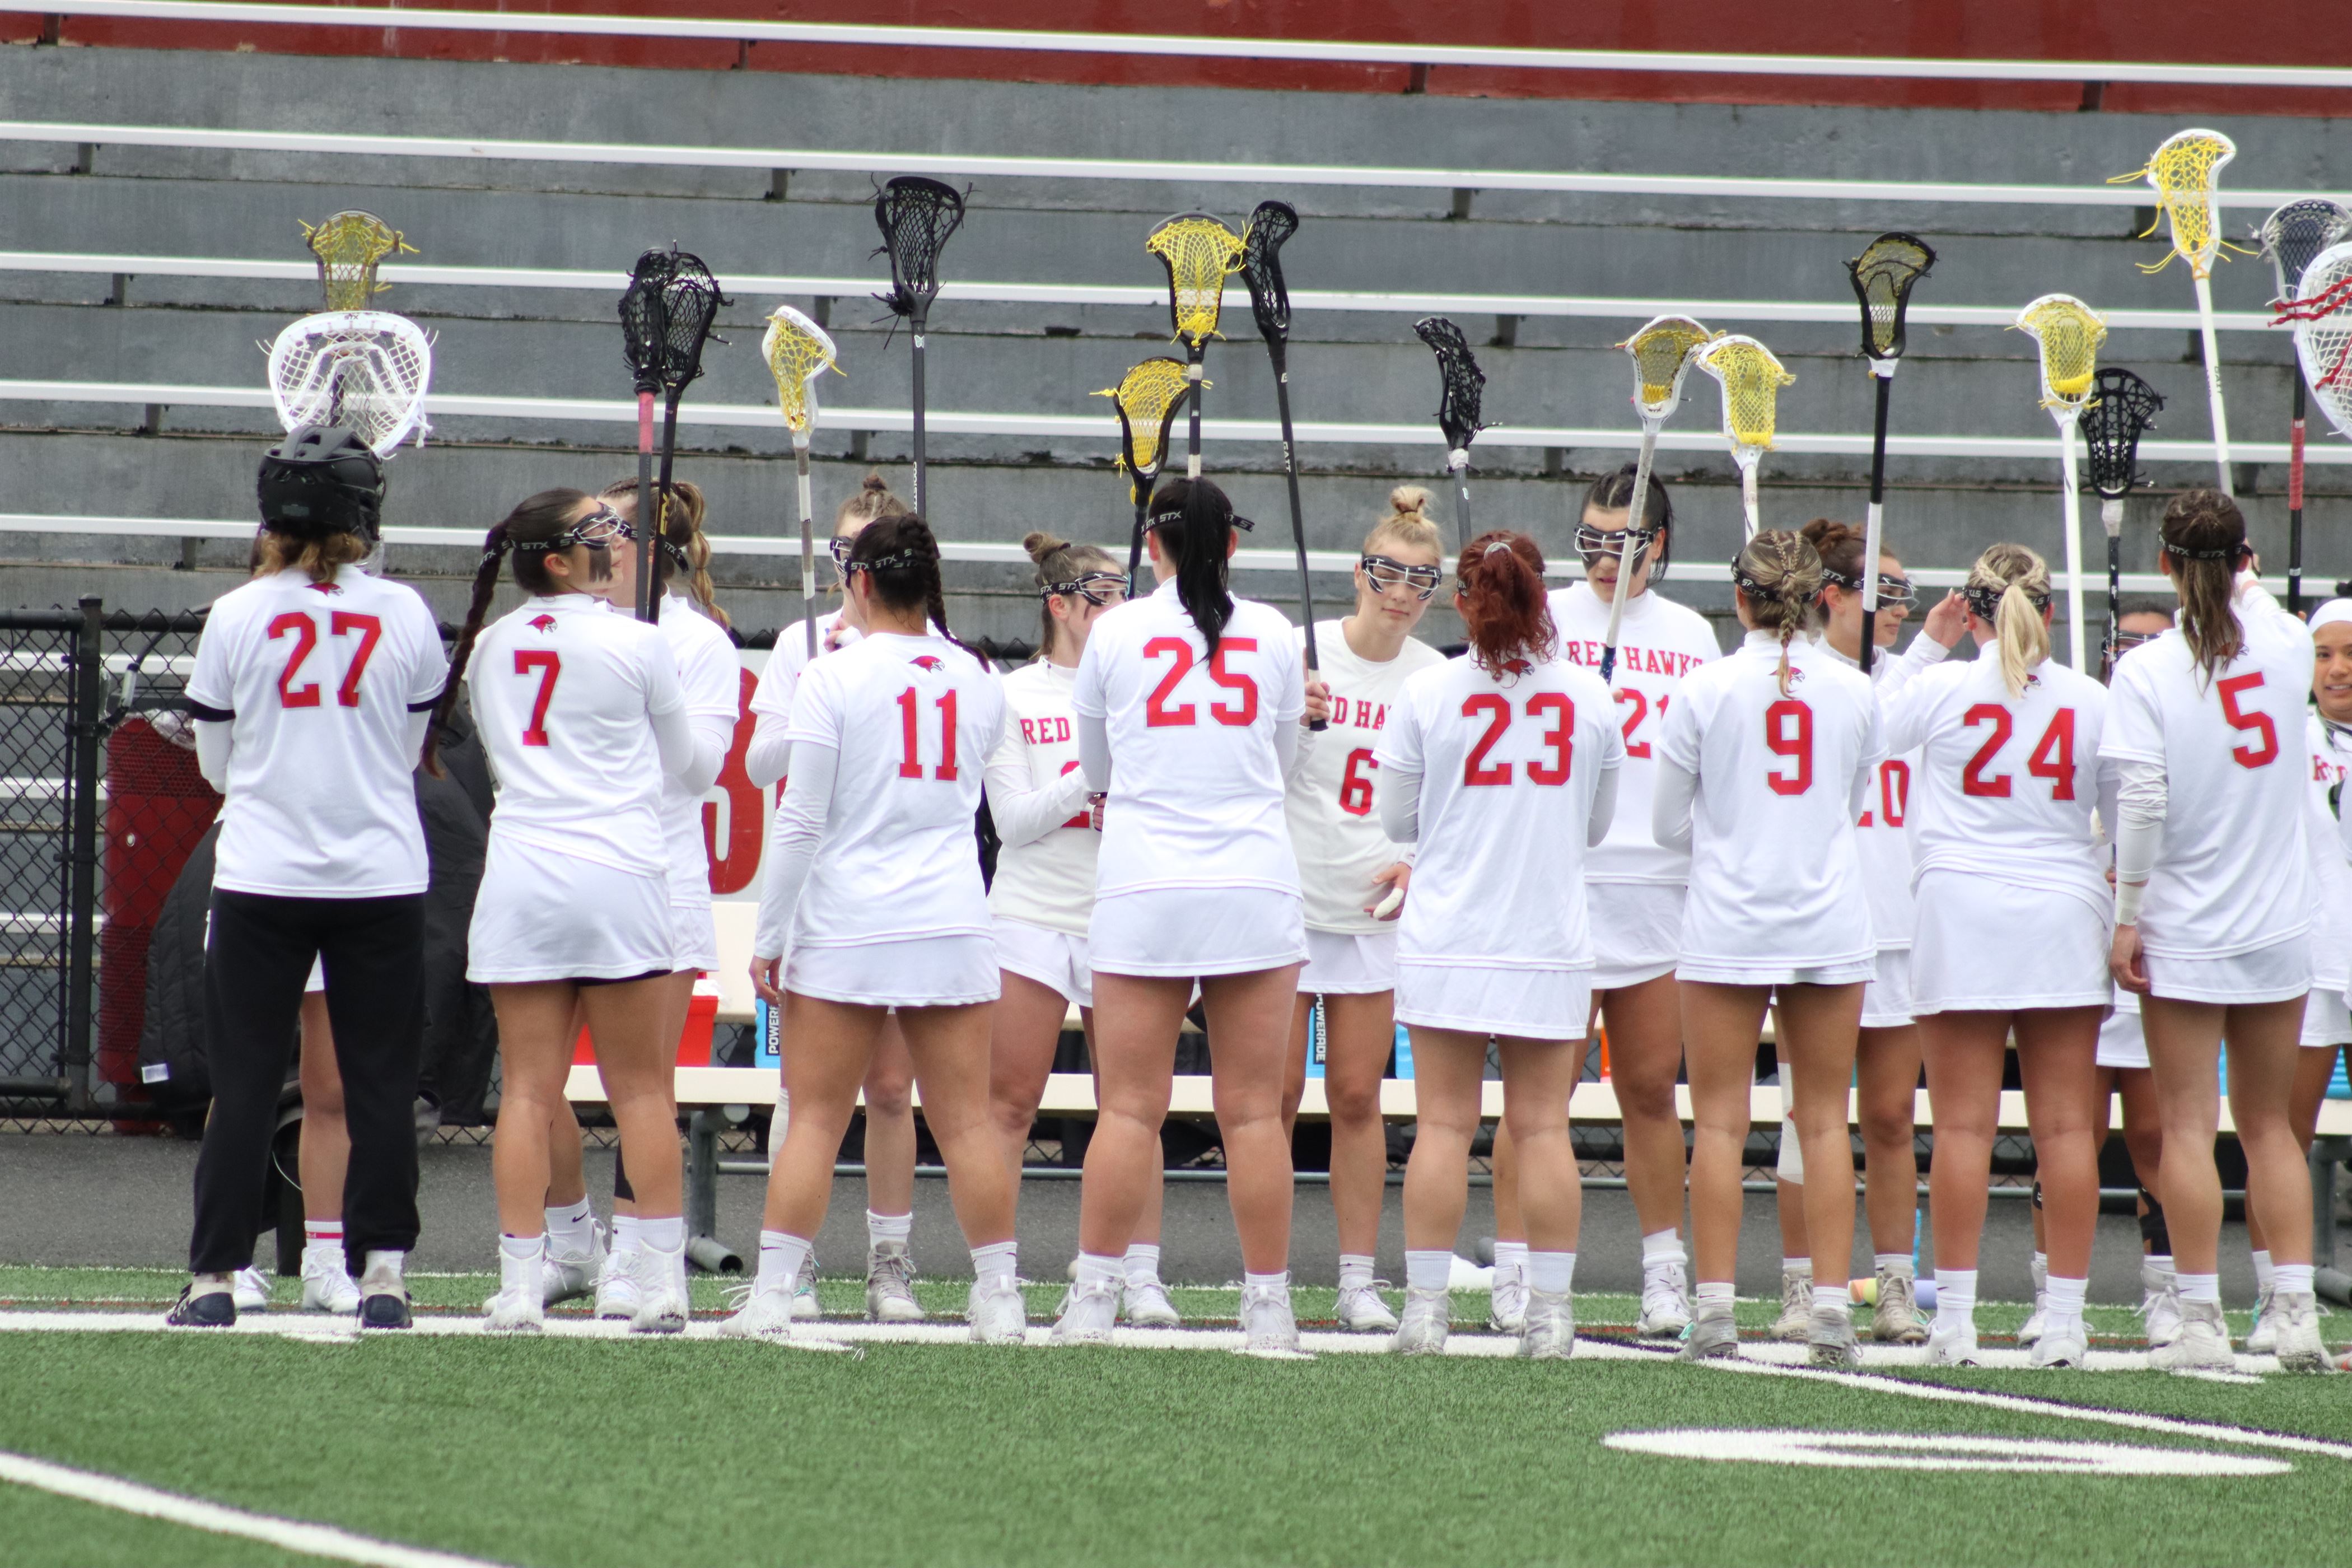 The women's lacrosse team put out their starting lineups before the game. Trevor Giesberg | The Montclarion